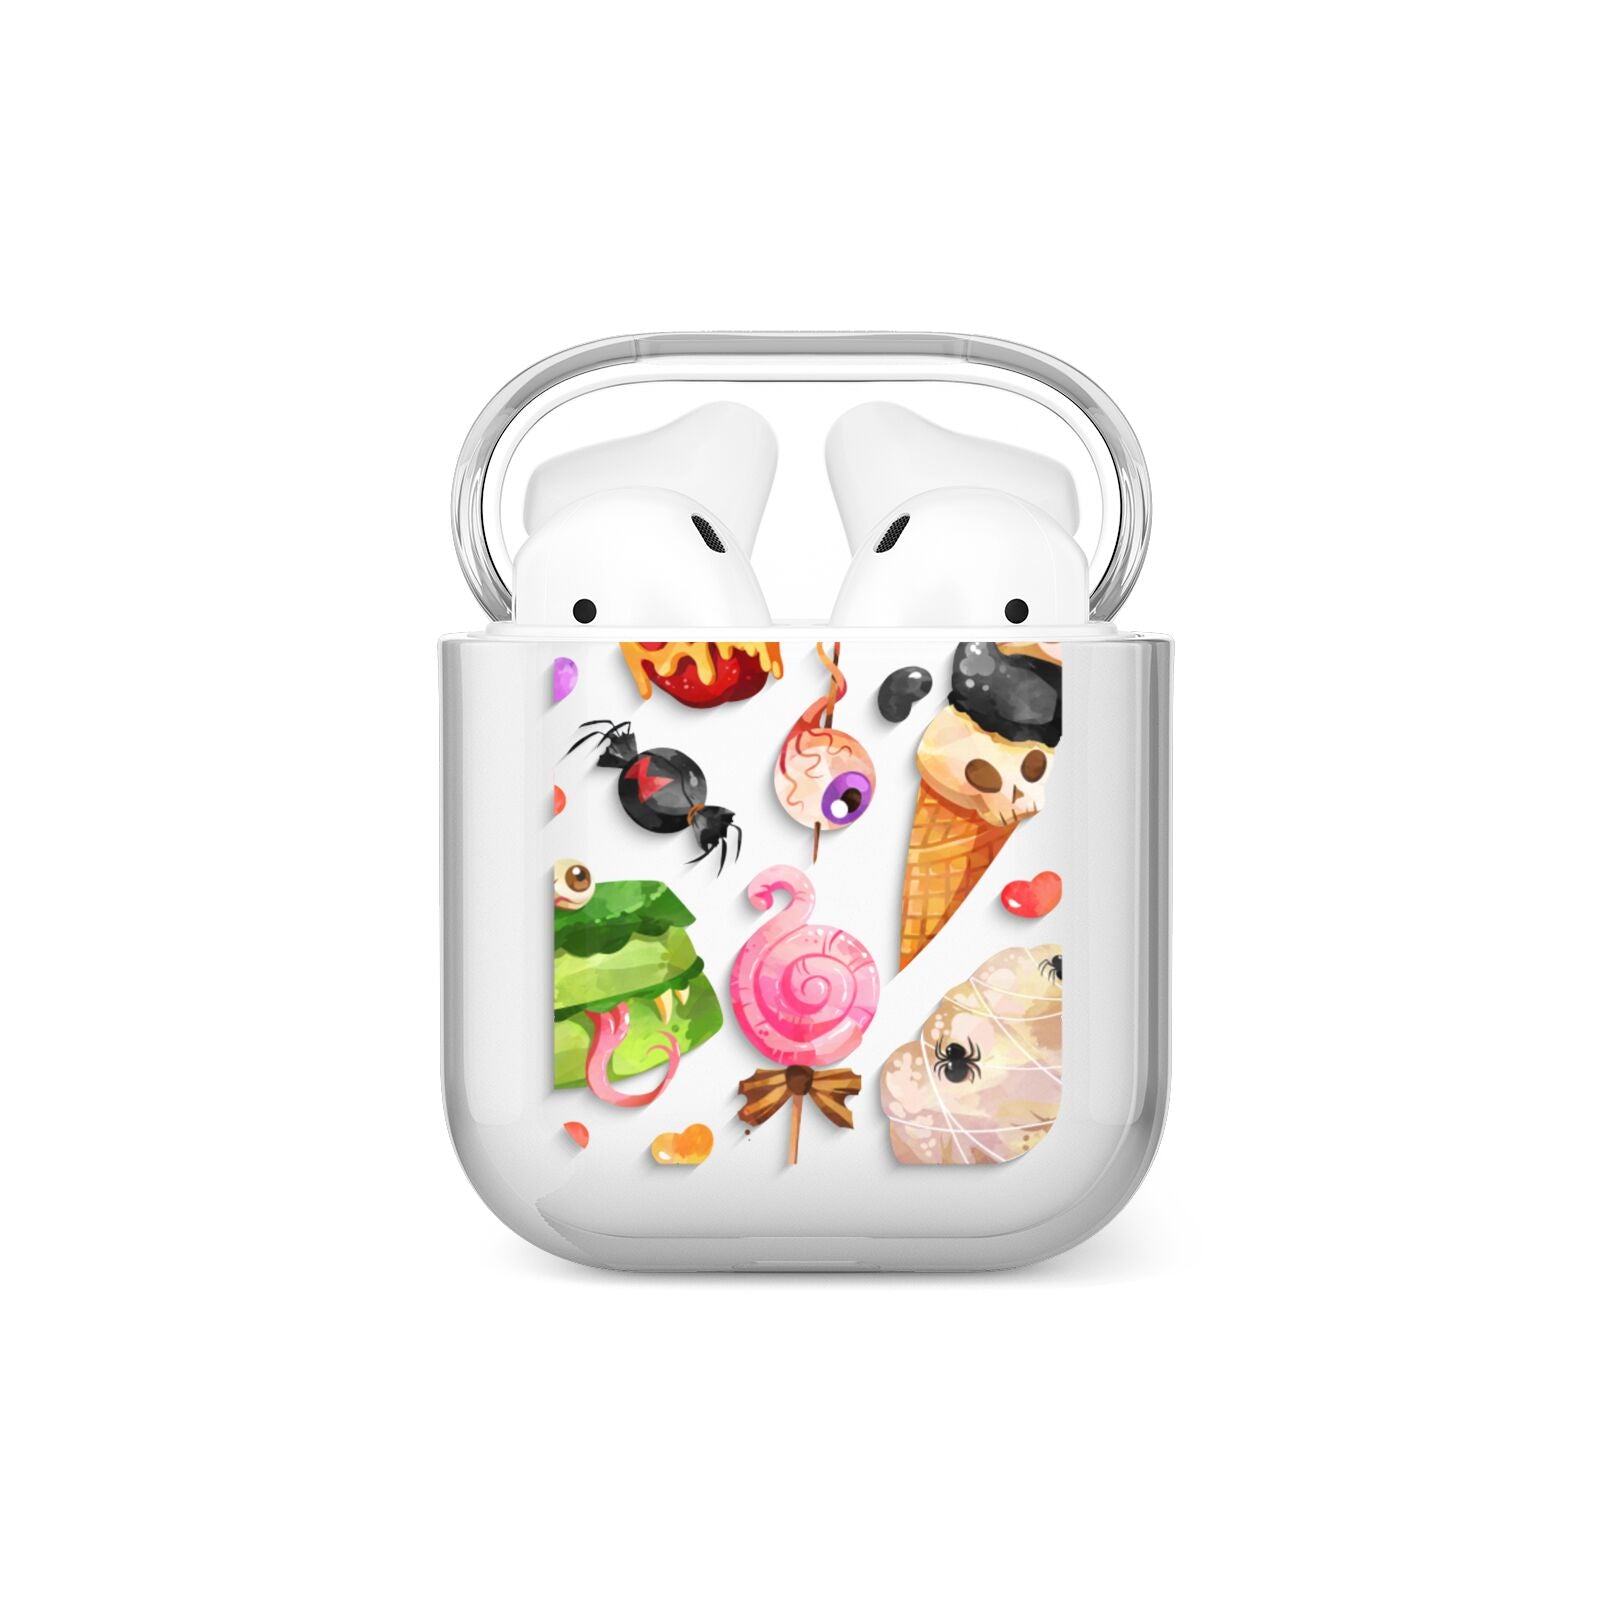 Halloween Cakes and Candy AirPods Case